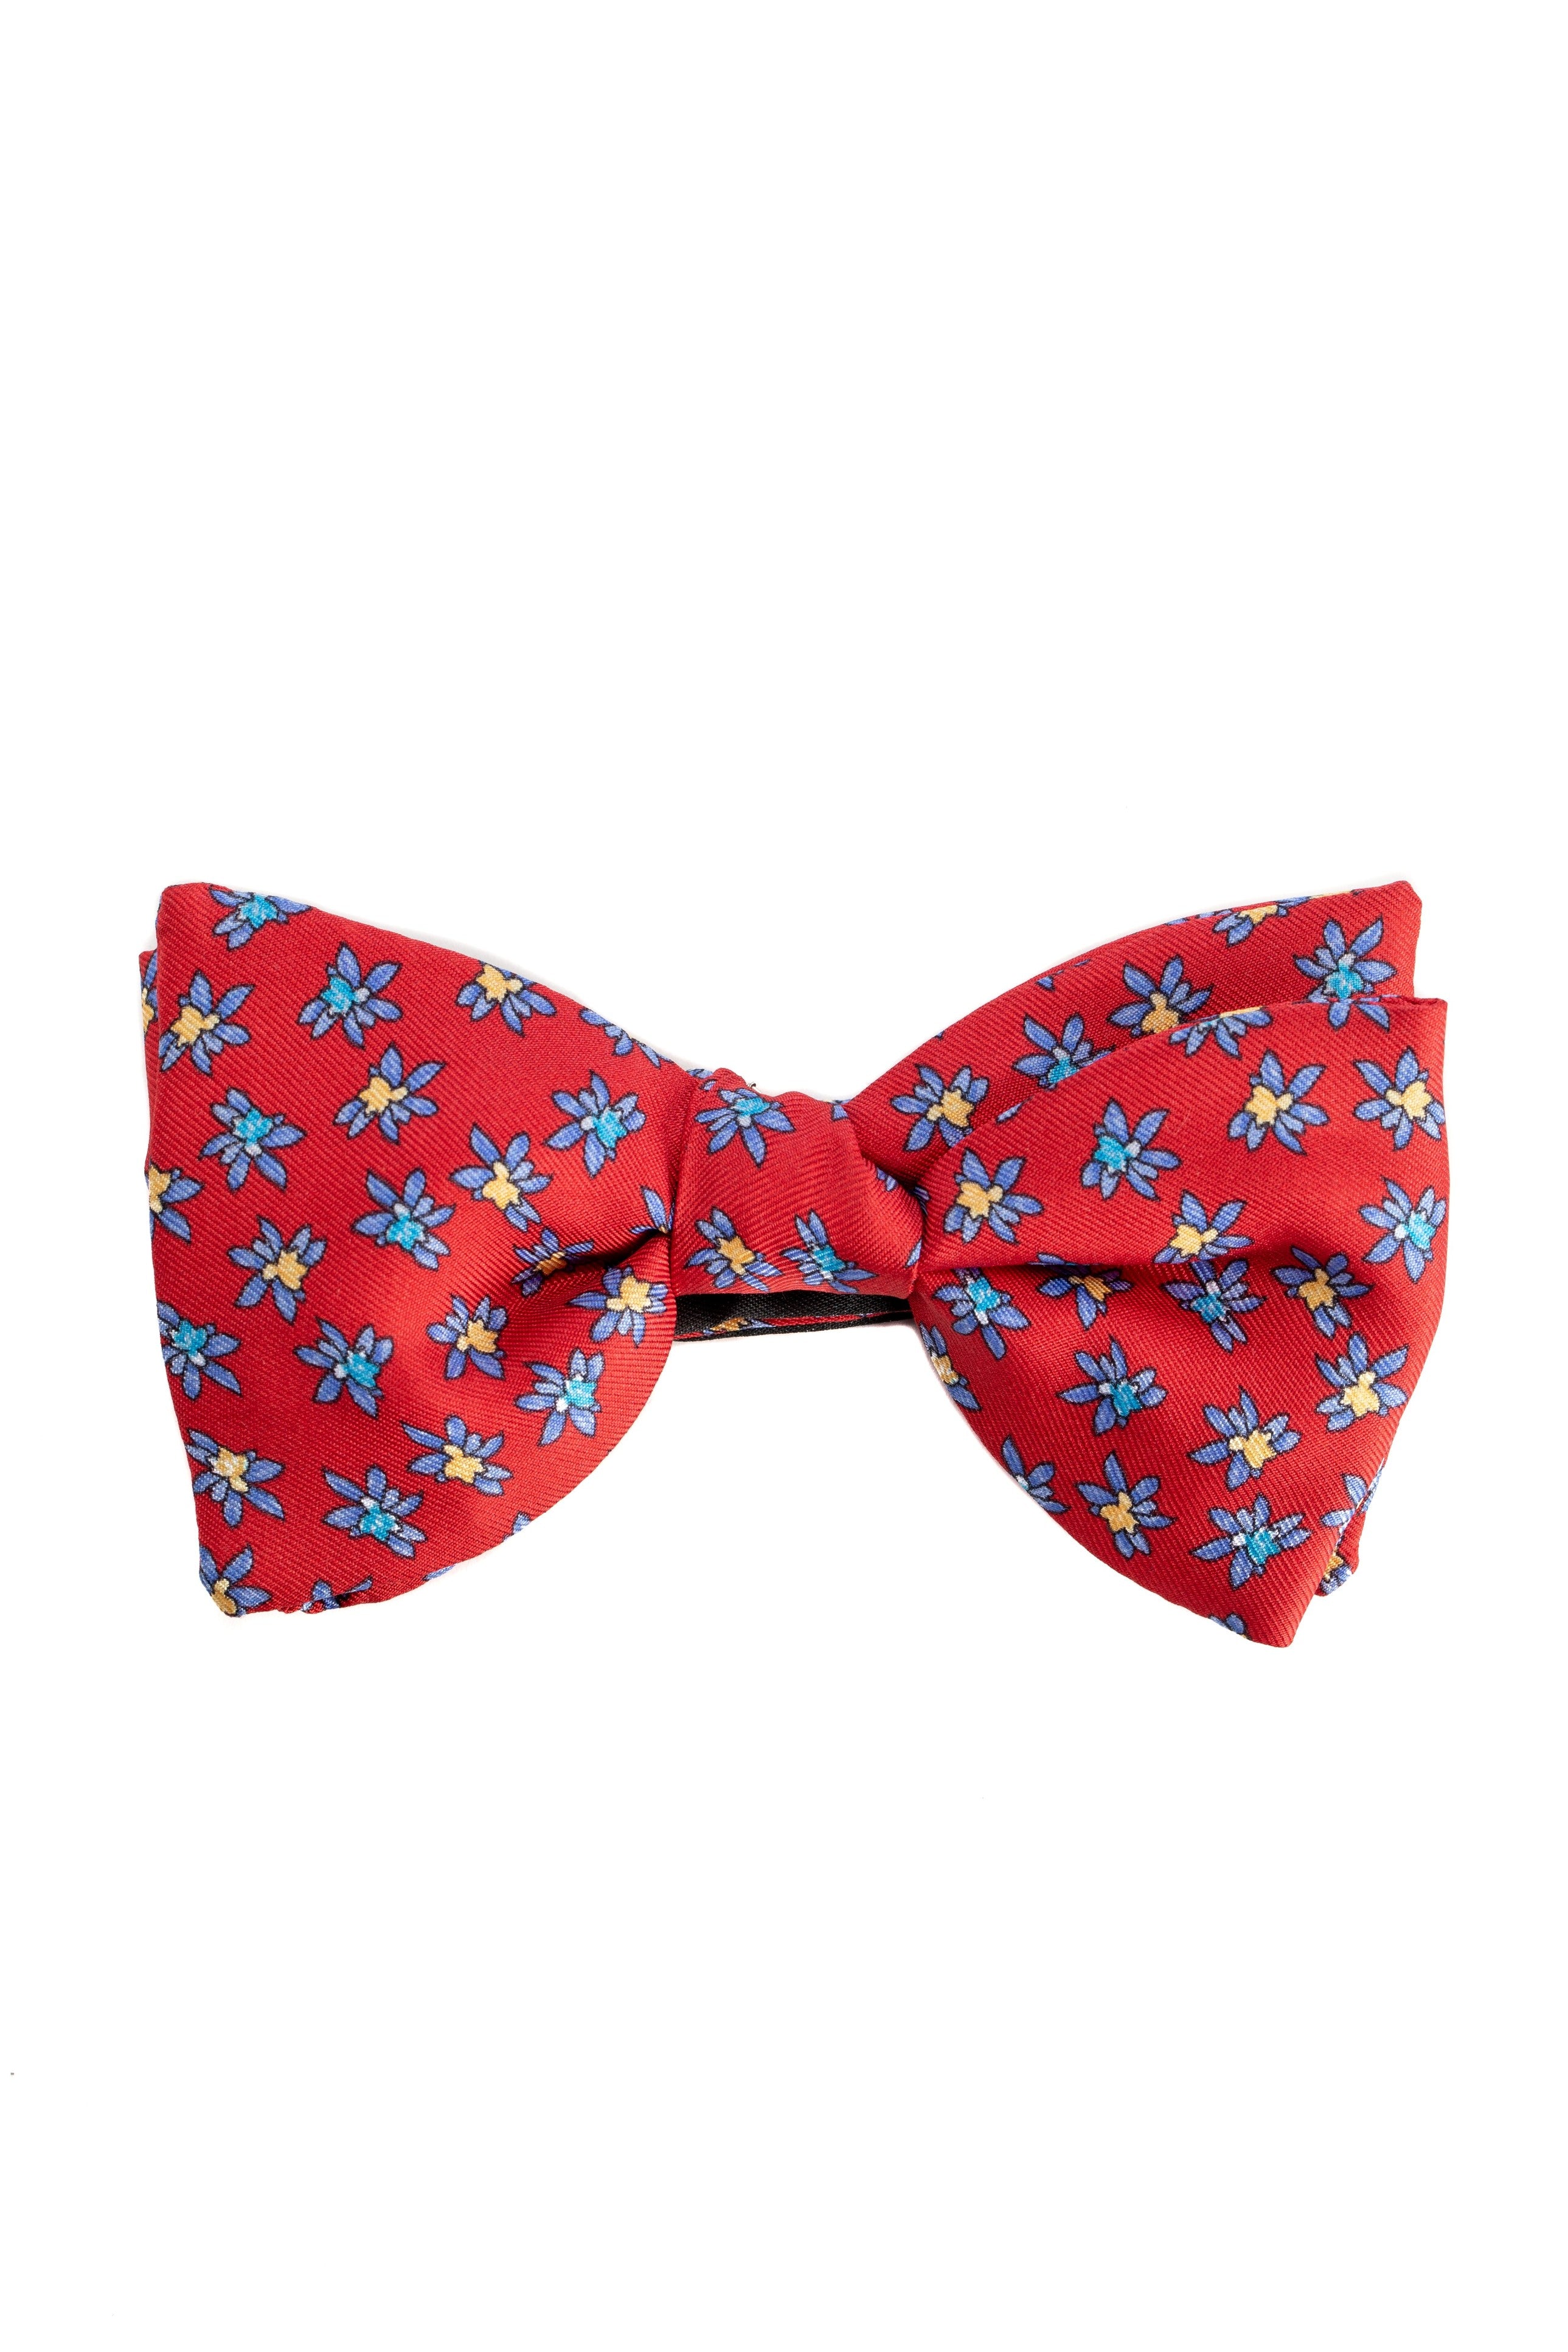 Red Bow Tie With Blue Flowers